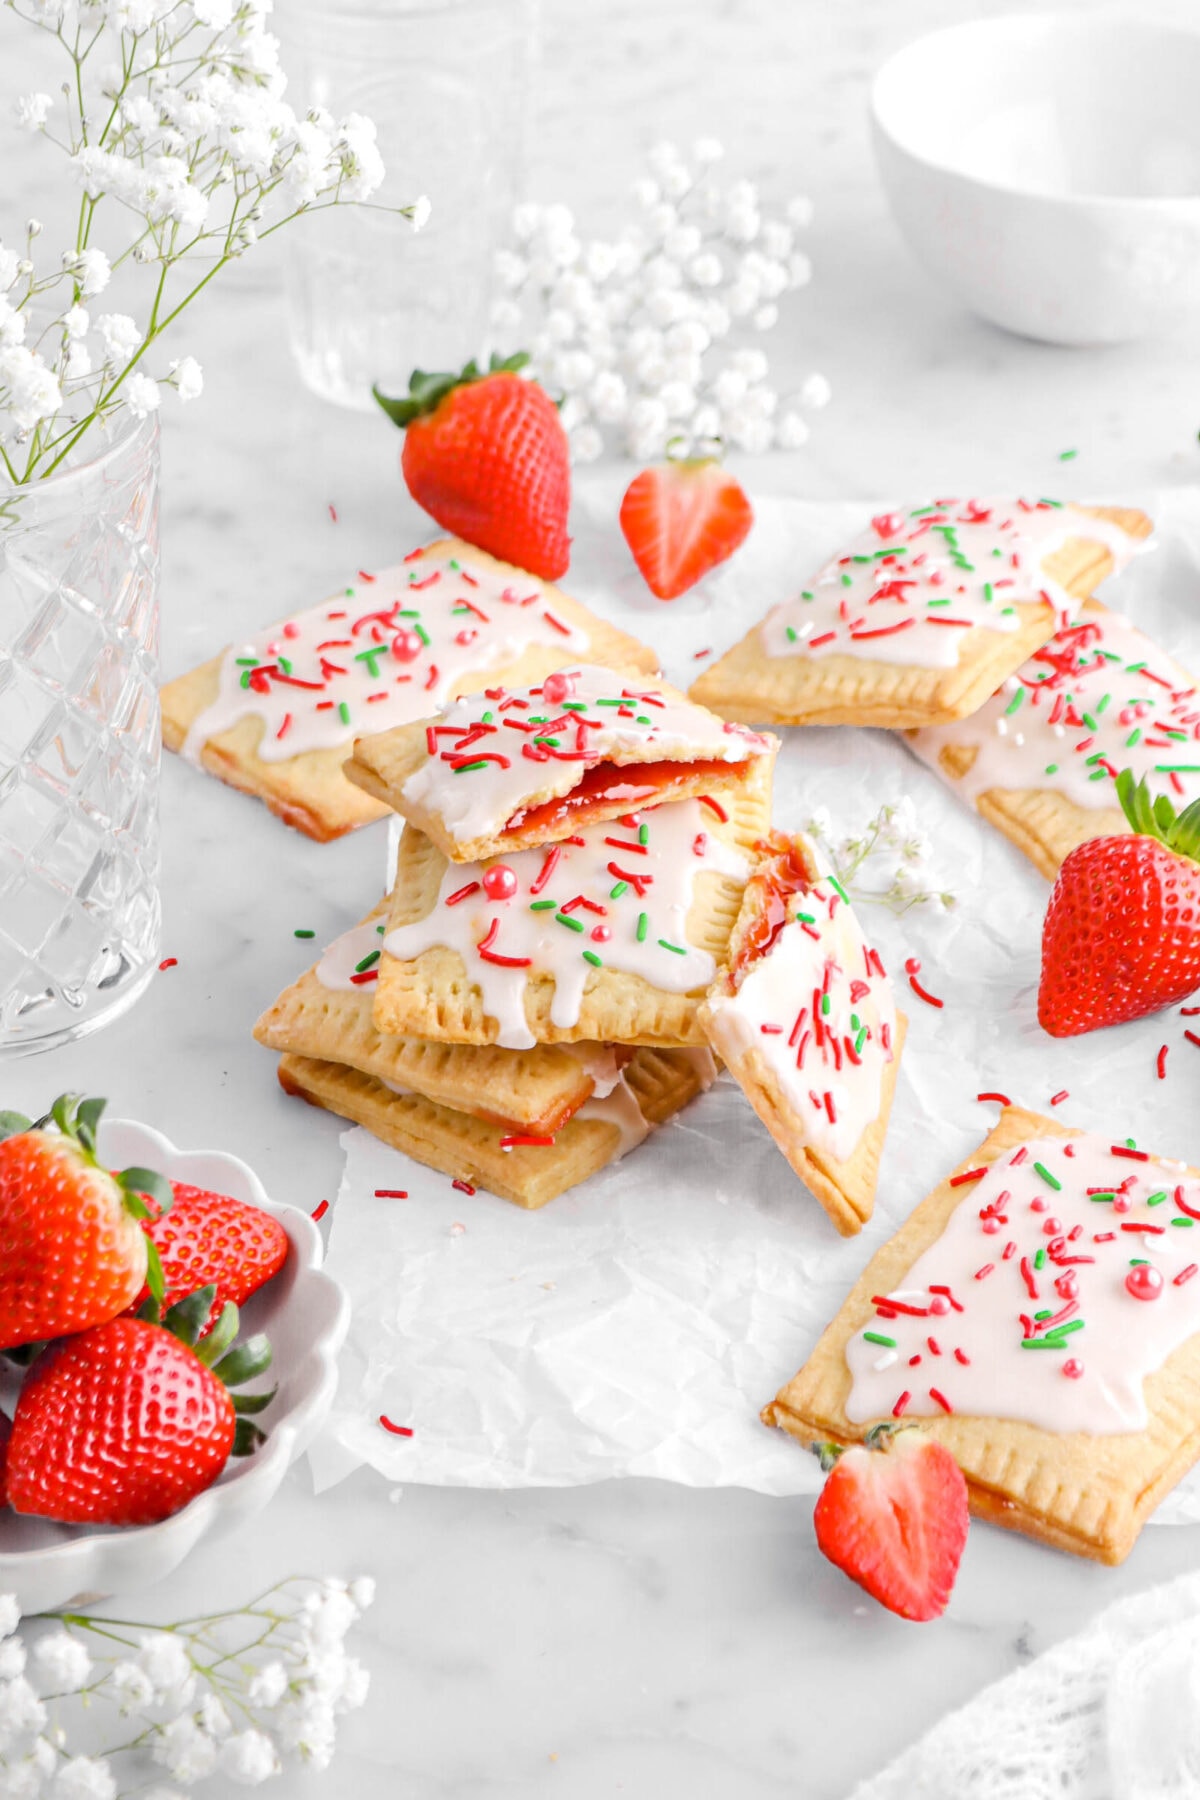 angled shot of stacked pop tarts with top pop tart broken in half with more pop tarts around, white flowers, and fresh strawberries.